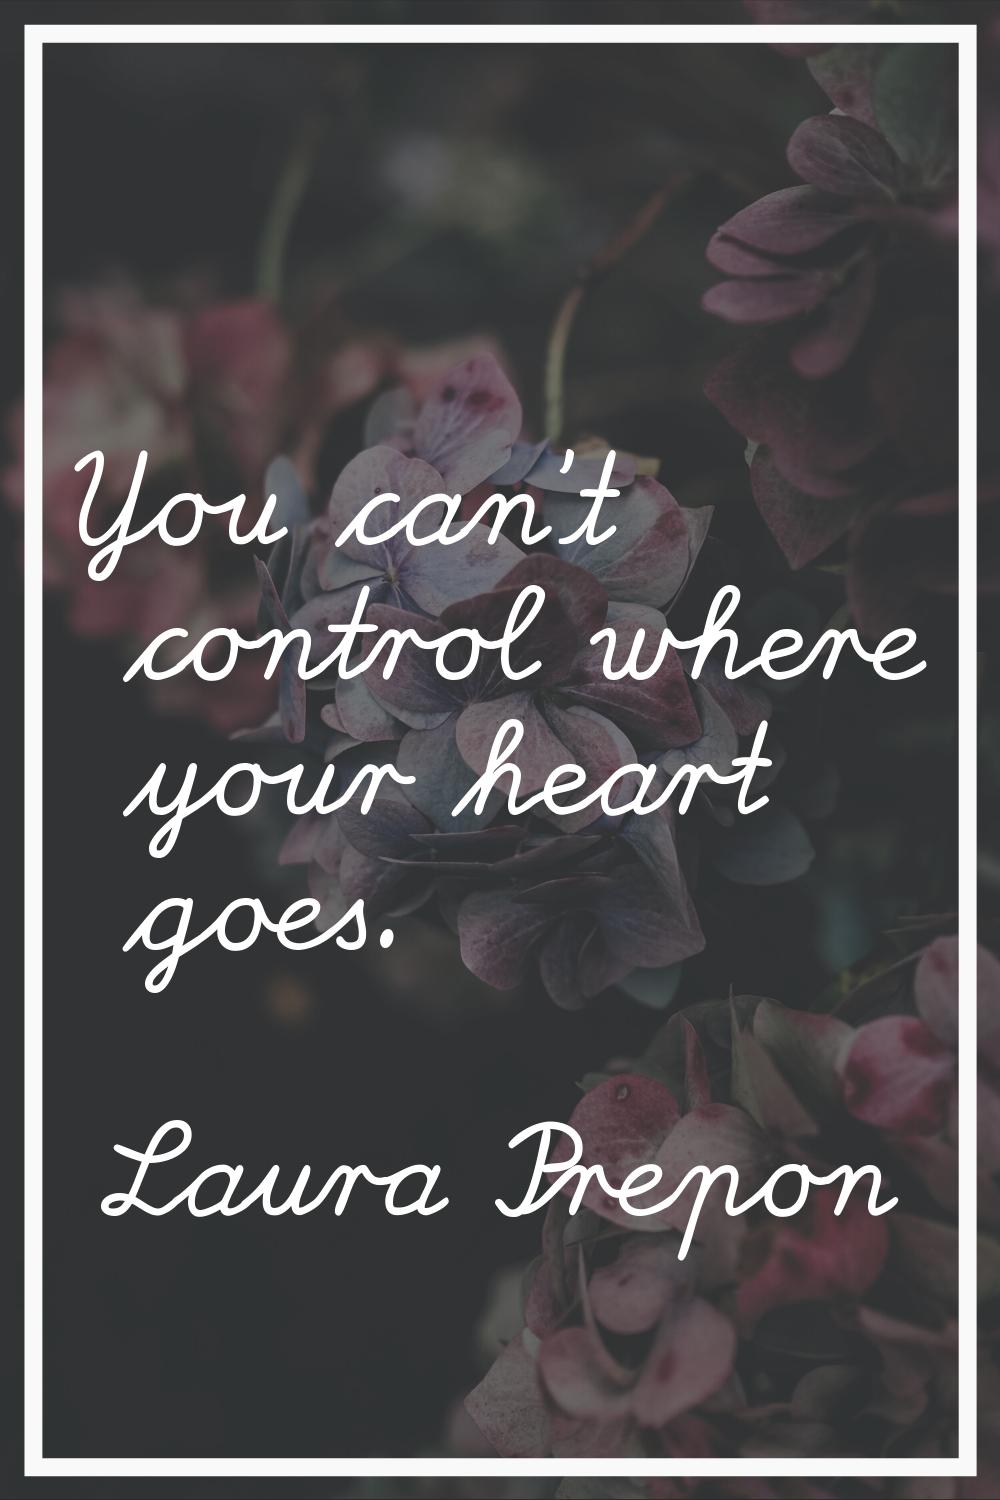 You can't control where your heart goes.